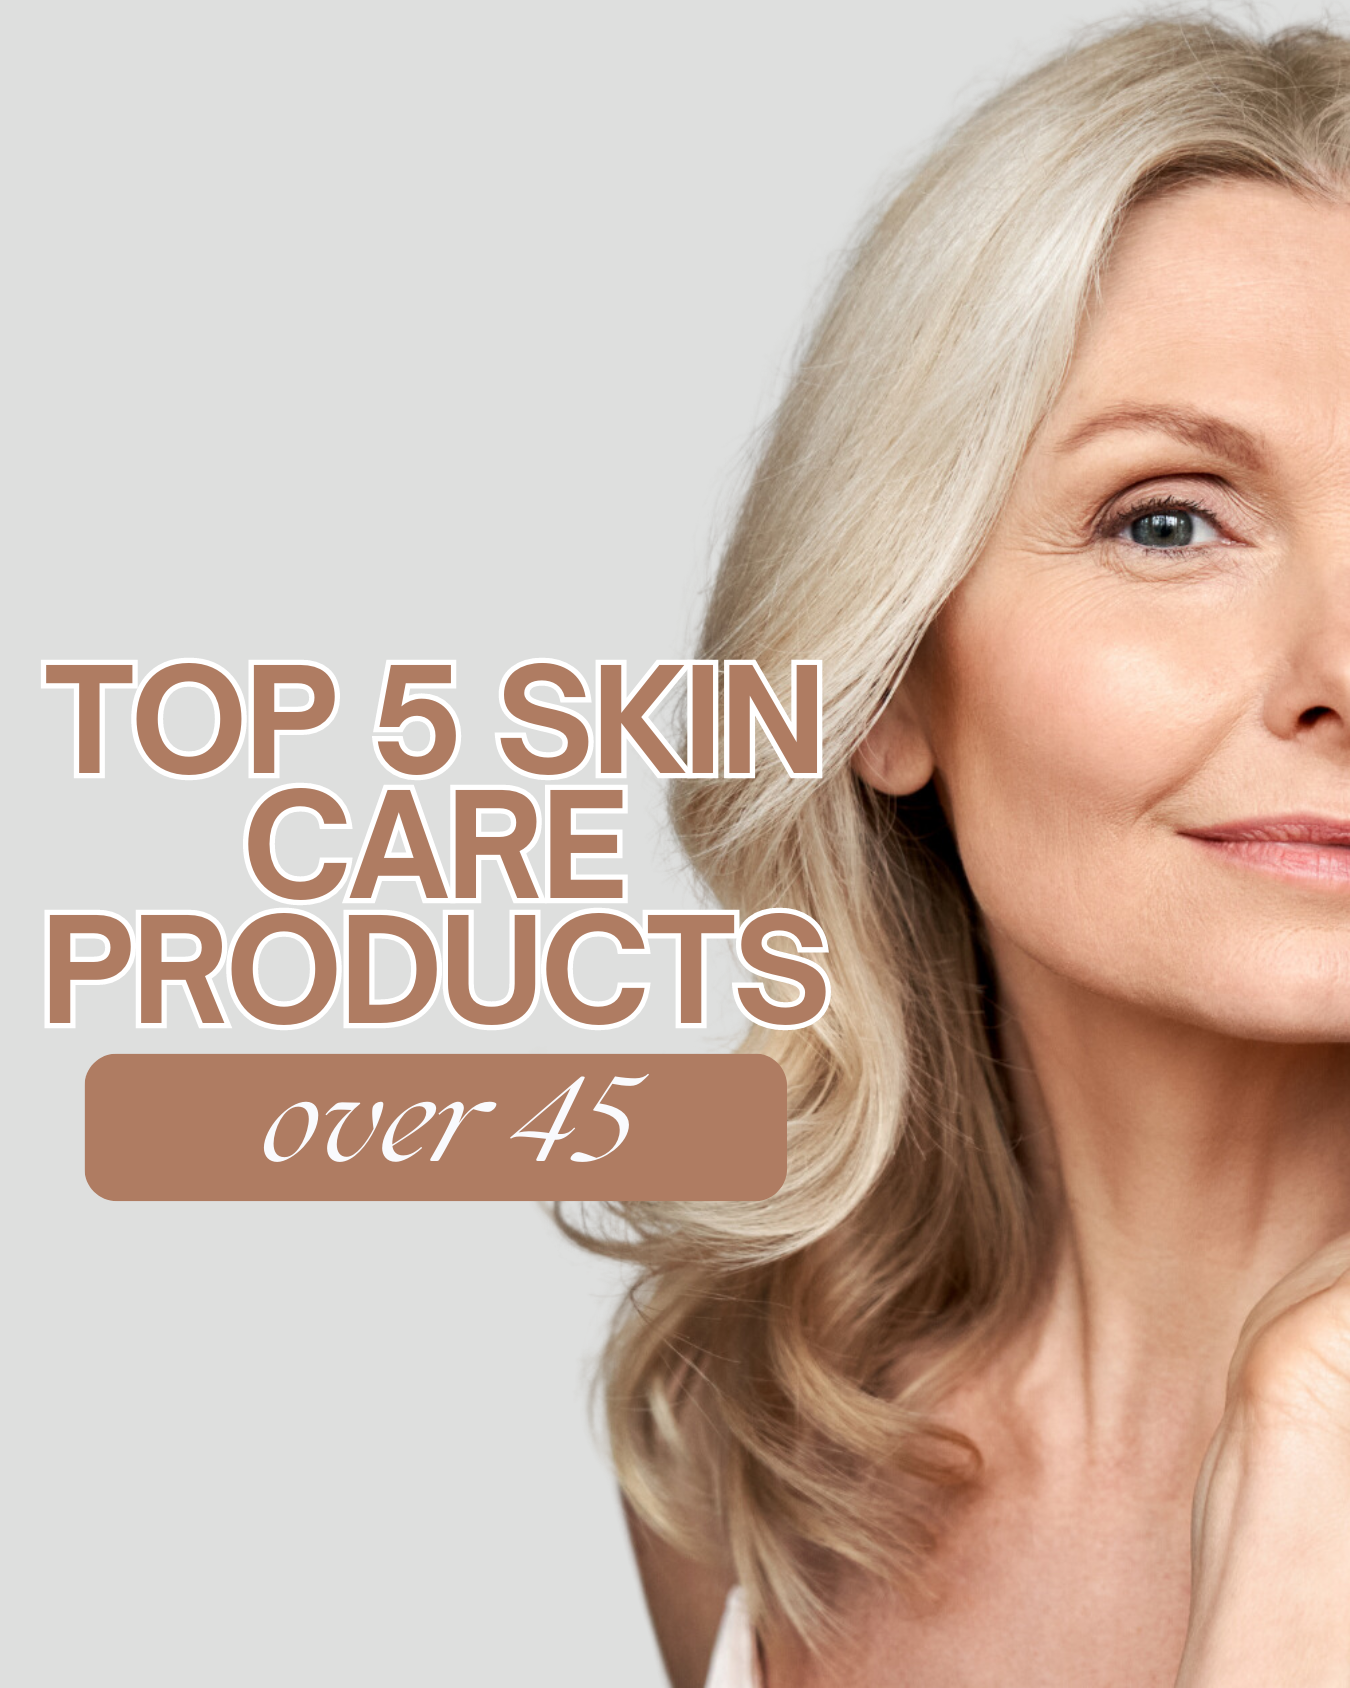 The Top 5 Skin Care Products Every Sassy Person Over 45 Needs